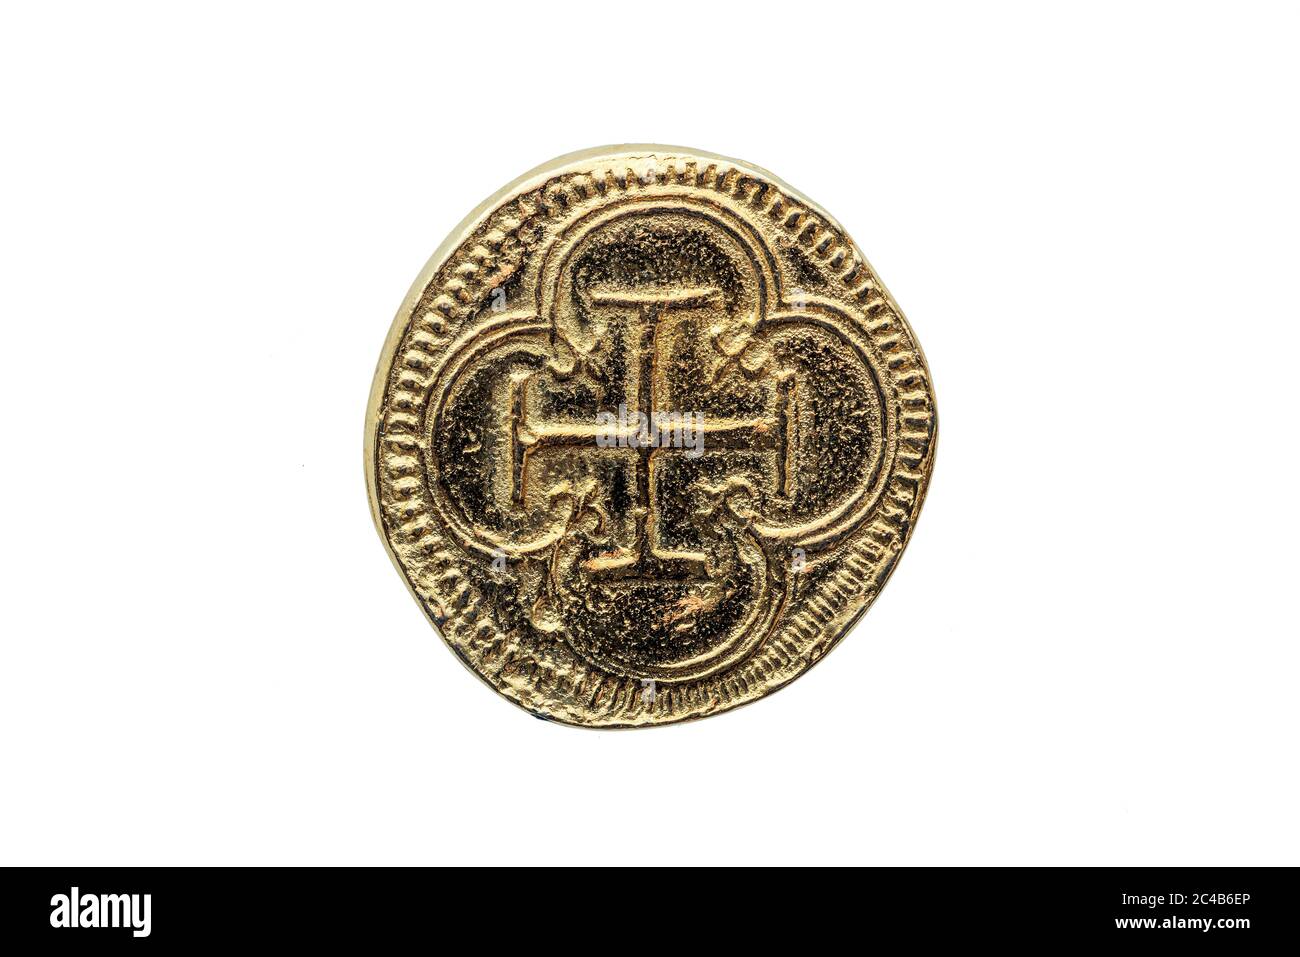 Gold Escudos Coin of Philip II (Felipe II) of Spain replica Cross In Quatrefoil Reverse side cut out and isolated on a white background Stock Photo